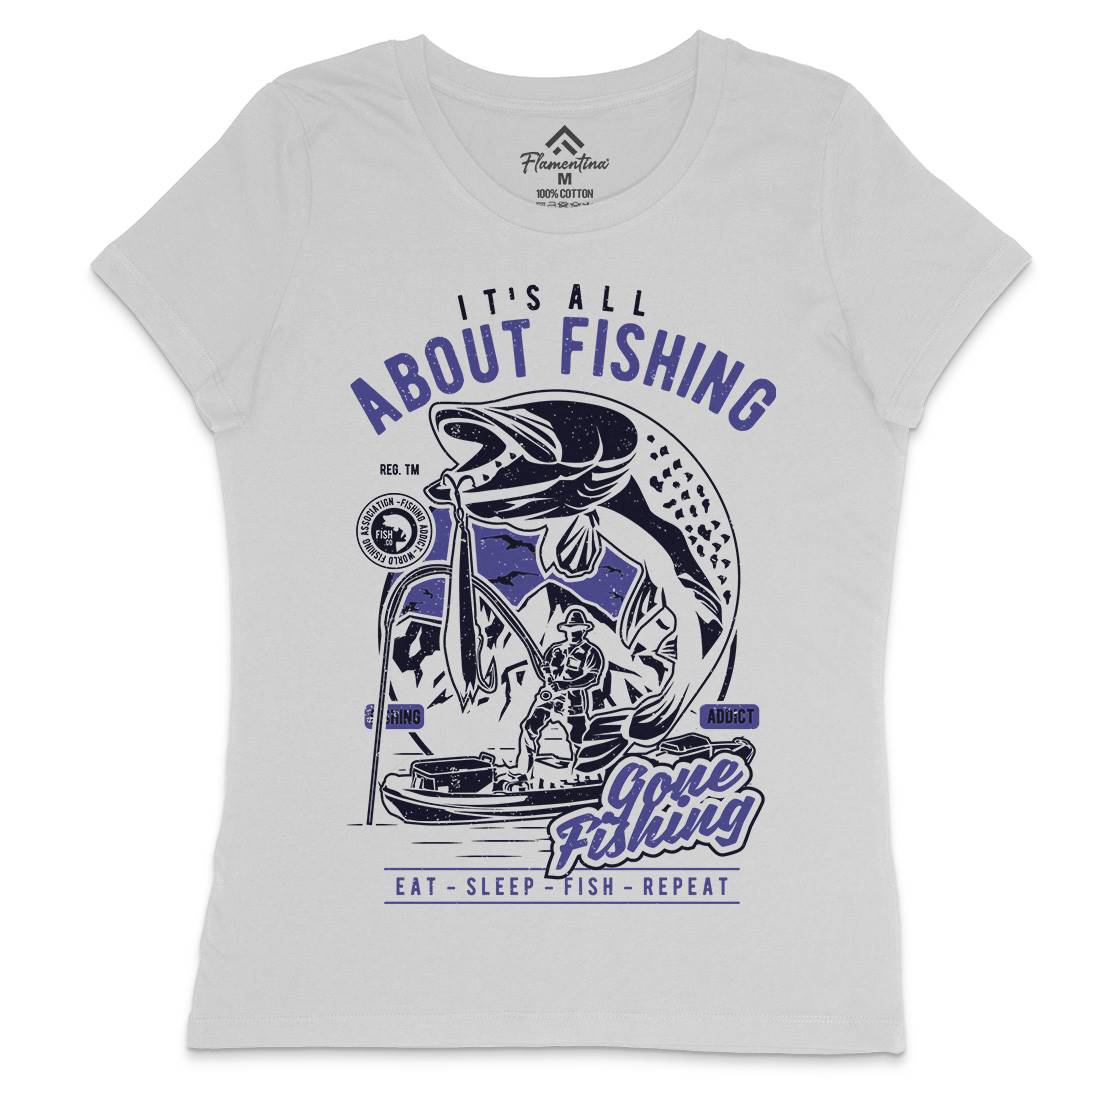 All About Womens Crew Neck T-Shirt Fishing A604